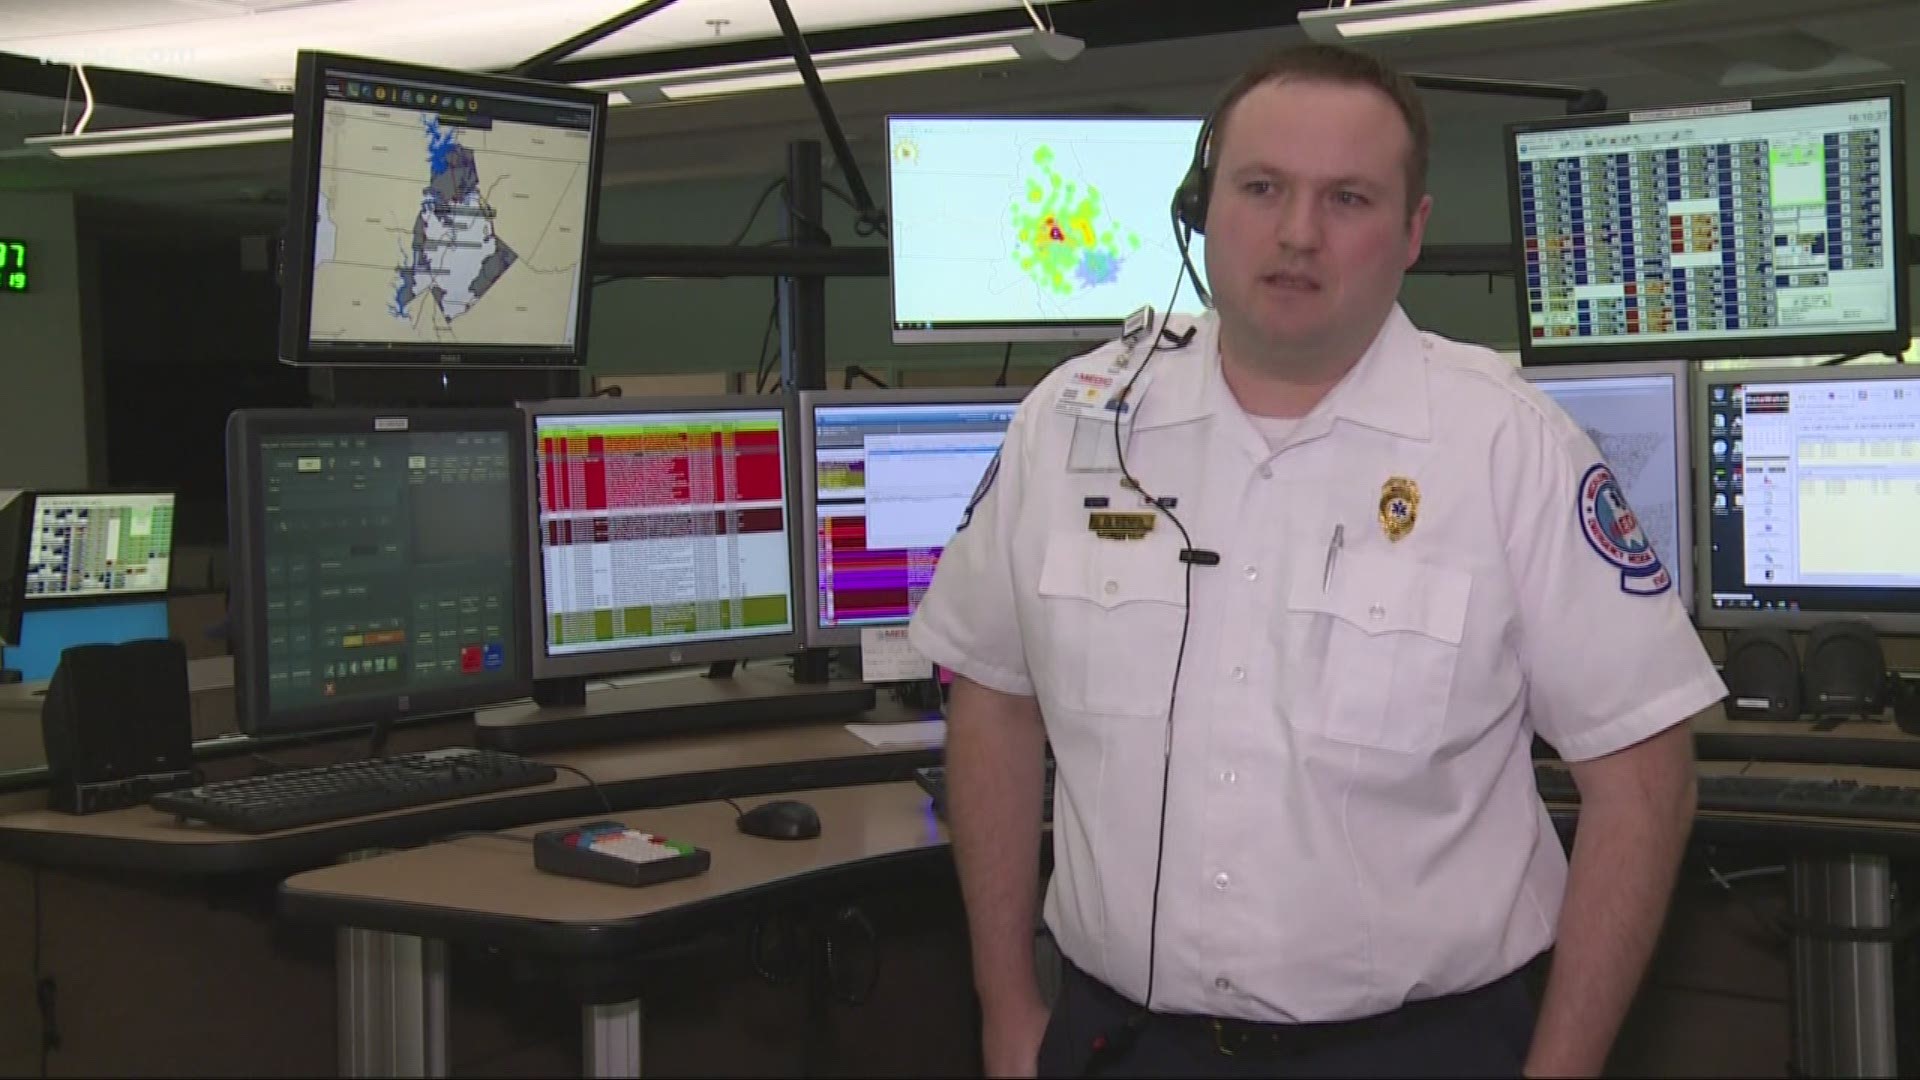 Every day, Mecklenburg County Medic's 911 center dispatchers answer about 400 emergency calls. They're responsible for more than a million people in a service area that stretches from Davidson to Matthews and everywhere in between.